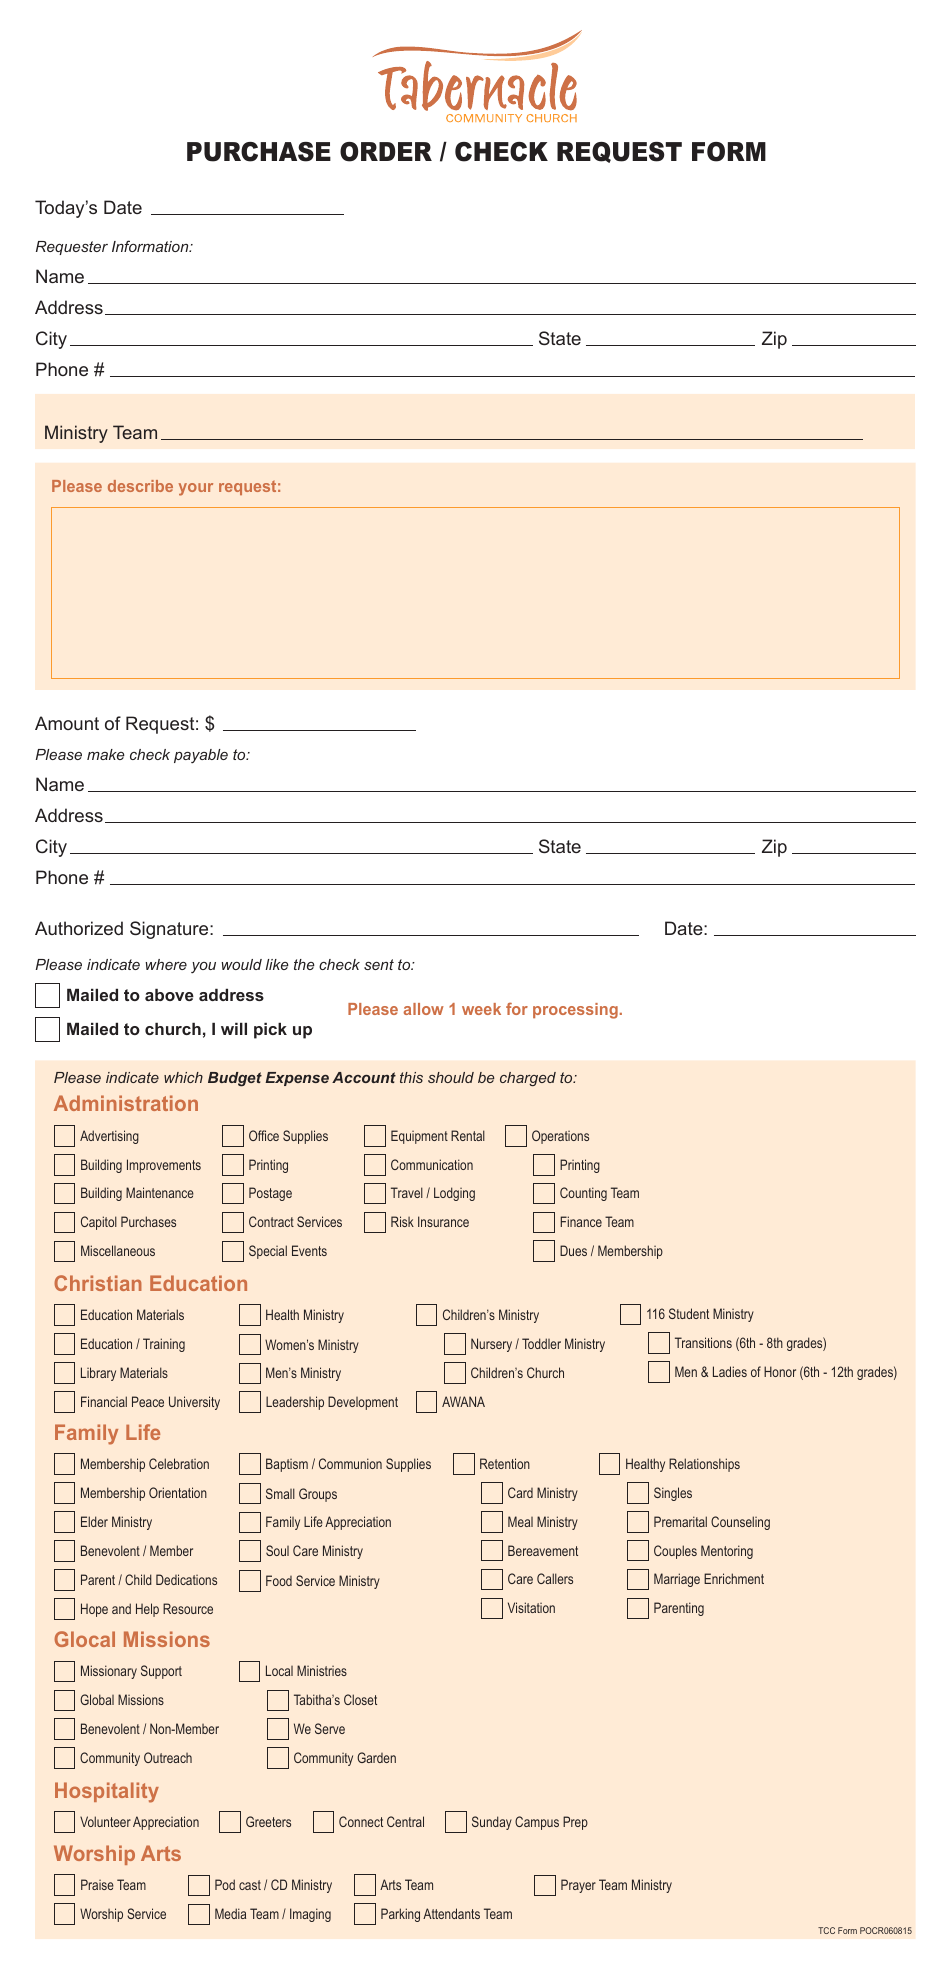 Purchase Order / Check Request Form - Tabernacle Community Church, Page 1